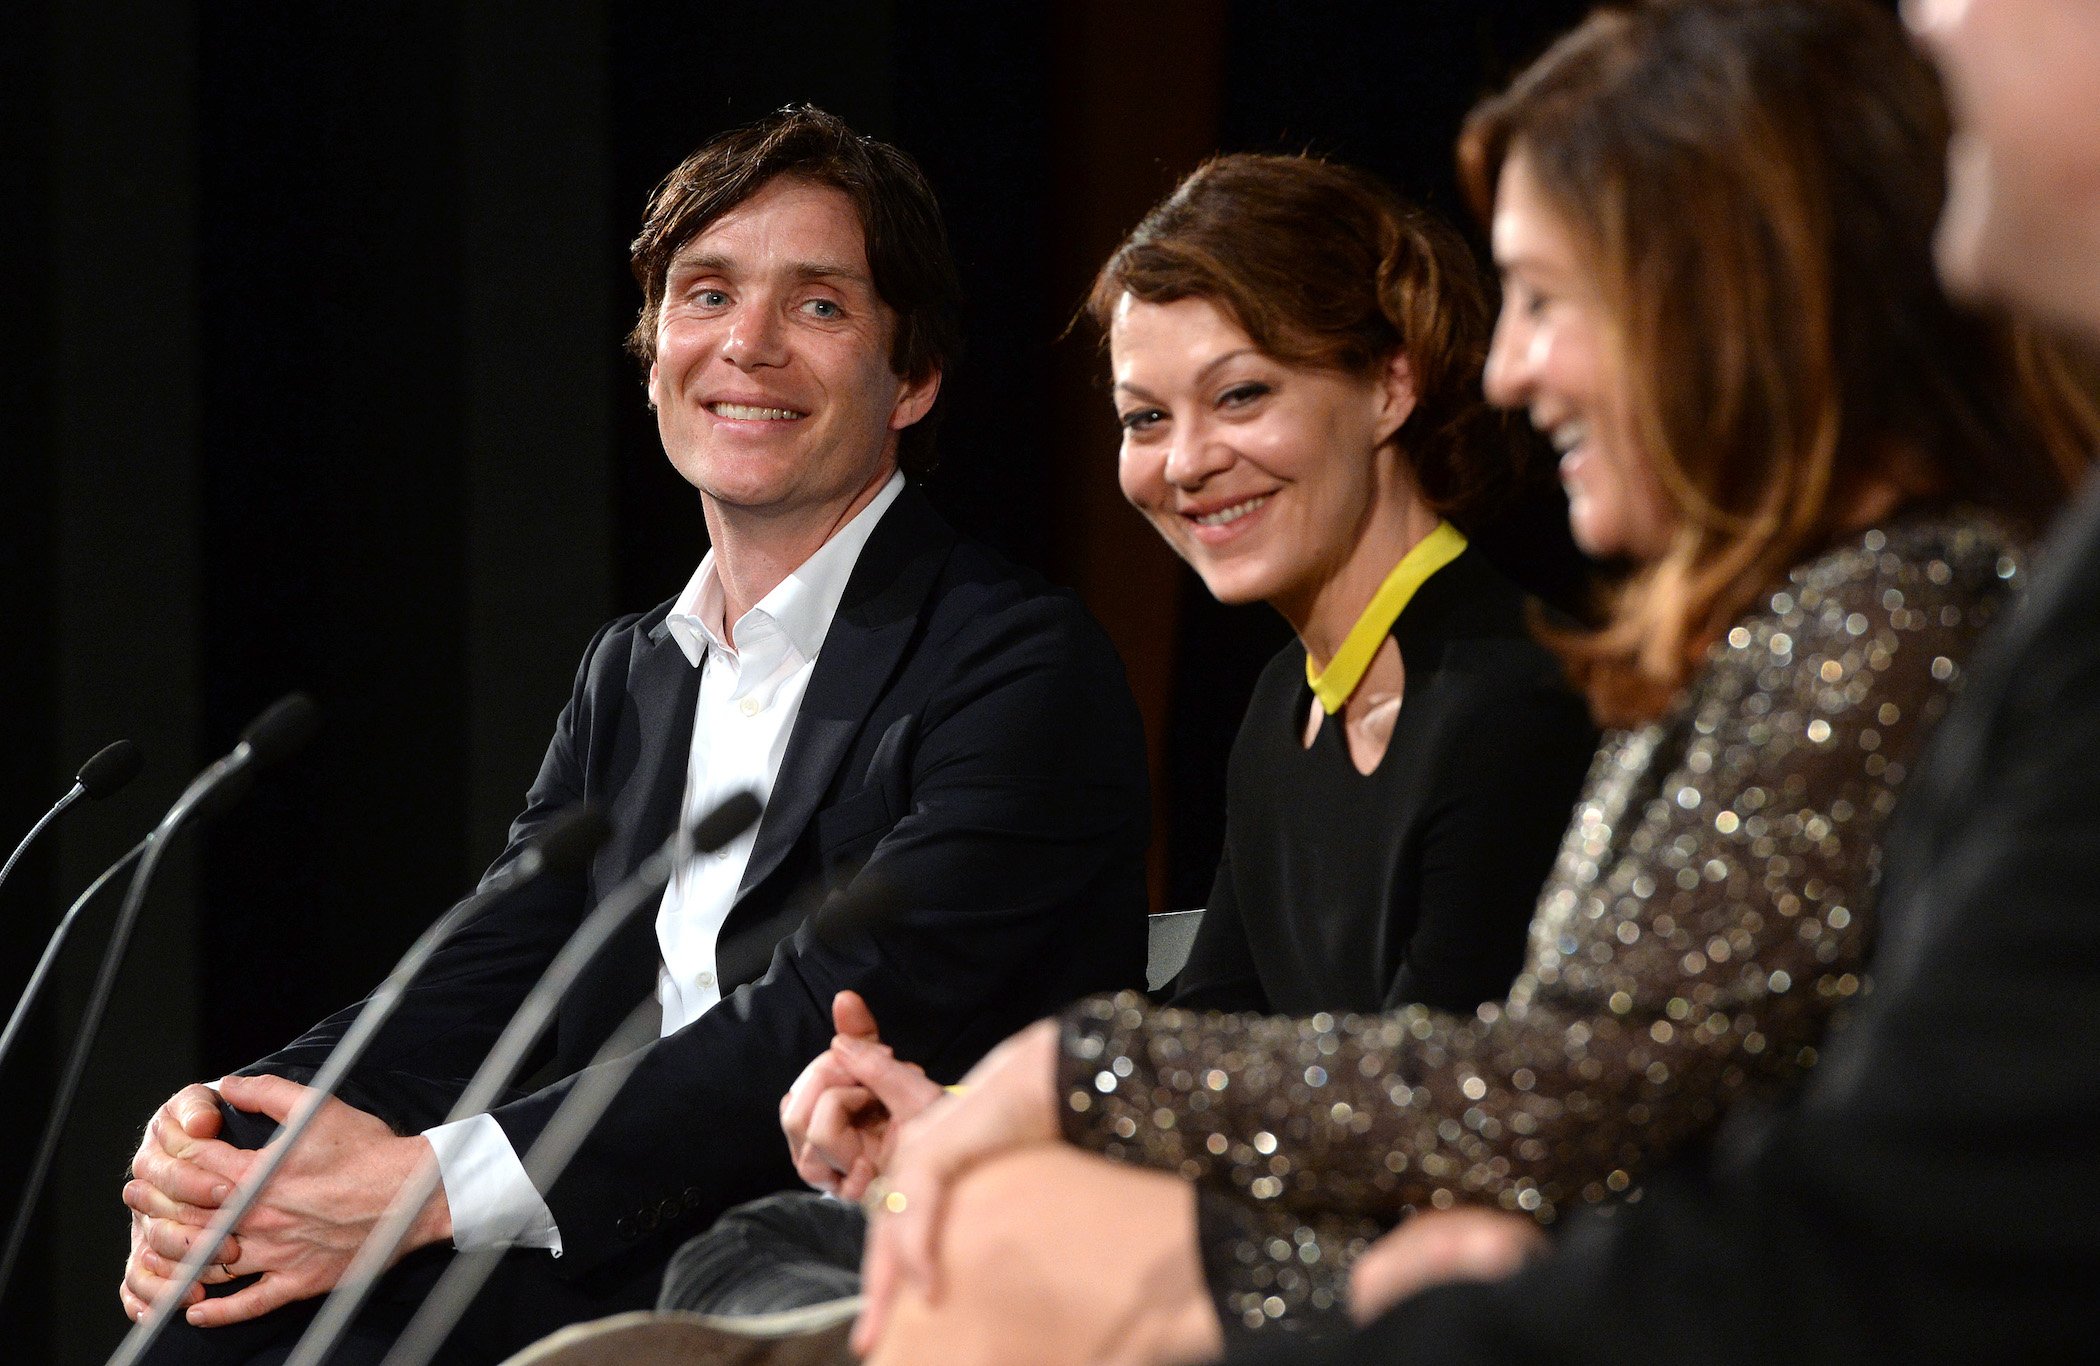 Cillian Murphy from 'Peaky Blinders' Season 6 and Helen McCrory smiling at a Q&A against a black background